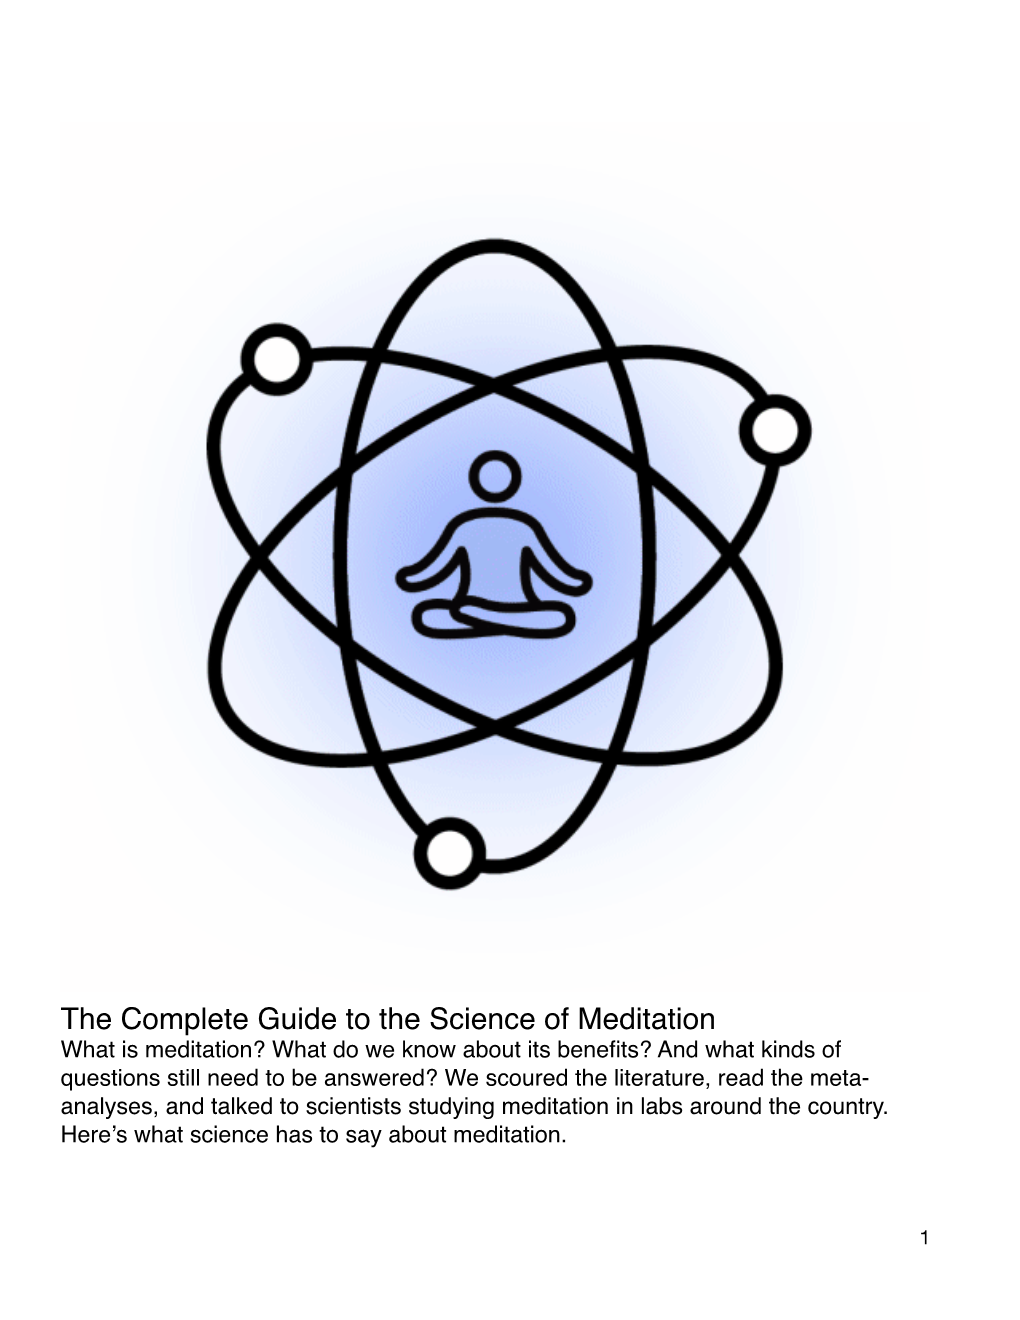 Science of Meditation Guide 0818